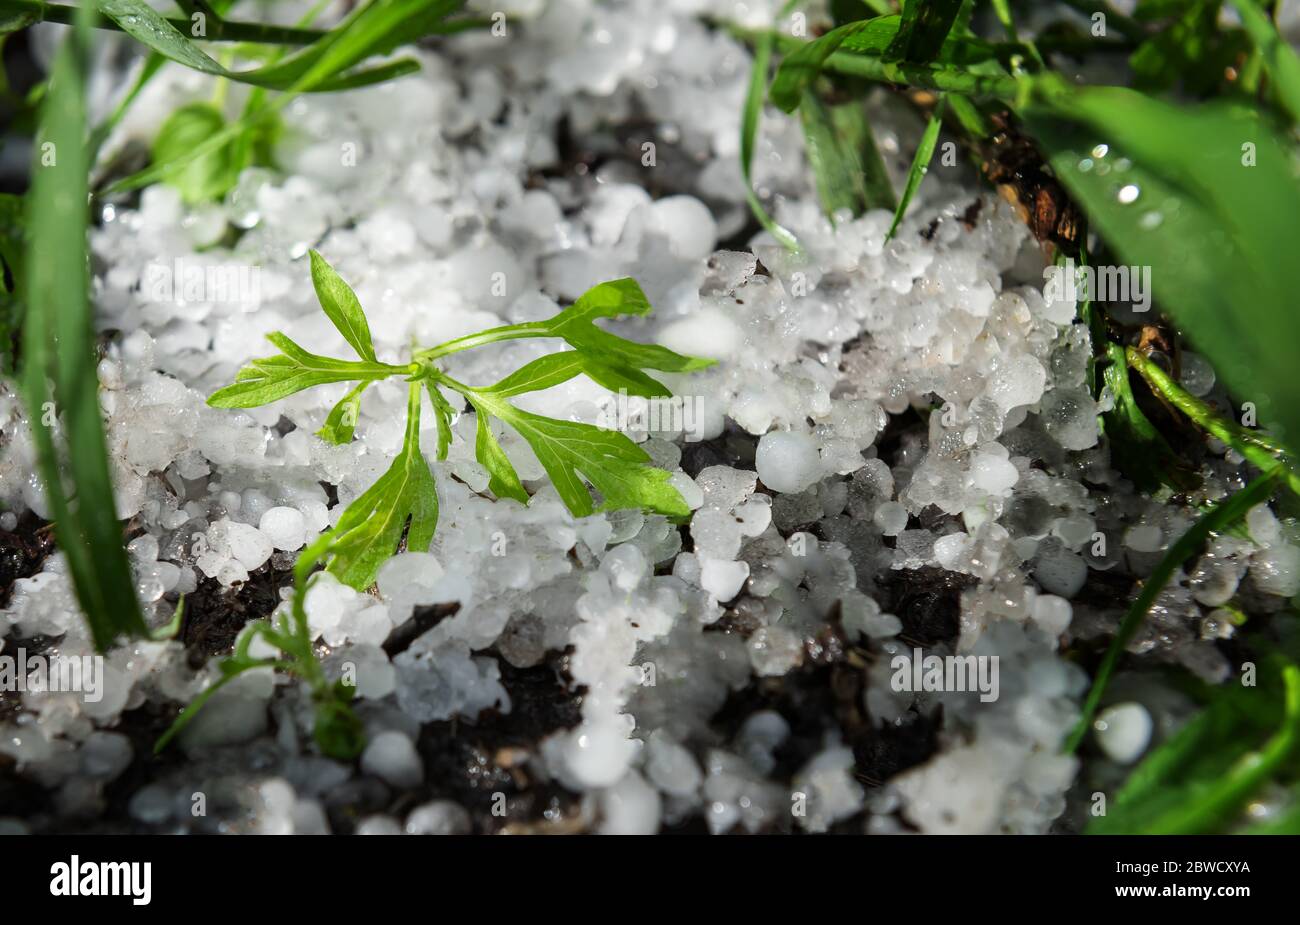 Scene after hail storm. Small green plant is covered by natural white hail balls that are melting under sunshine and framed by unfocused green grass l Stock Photo